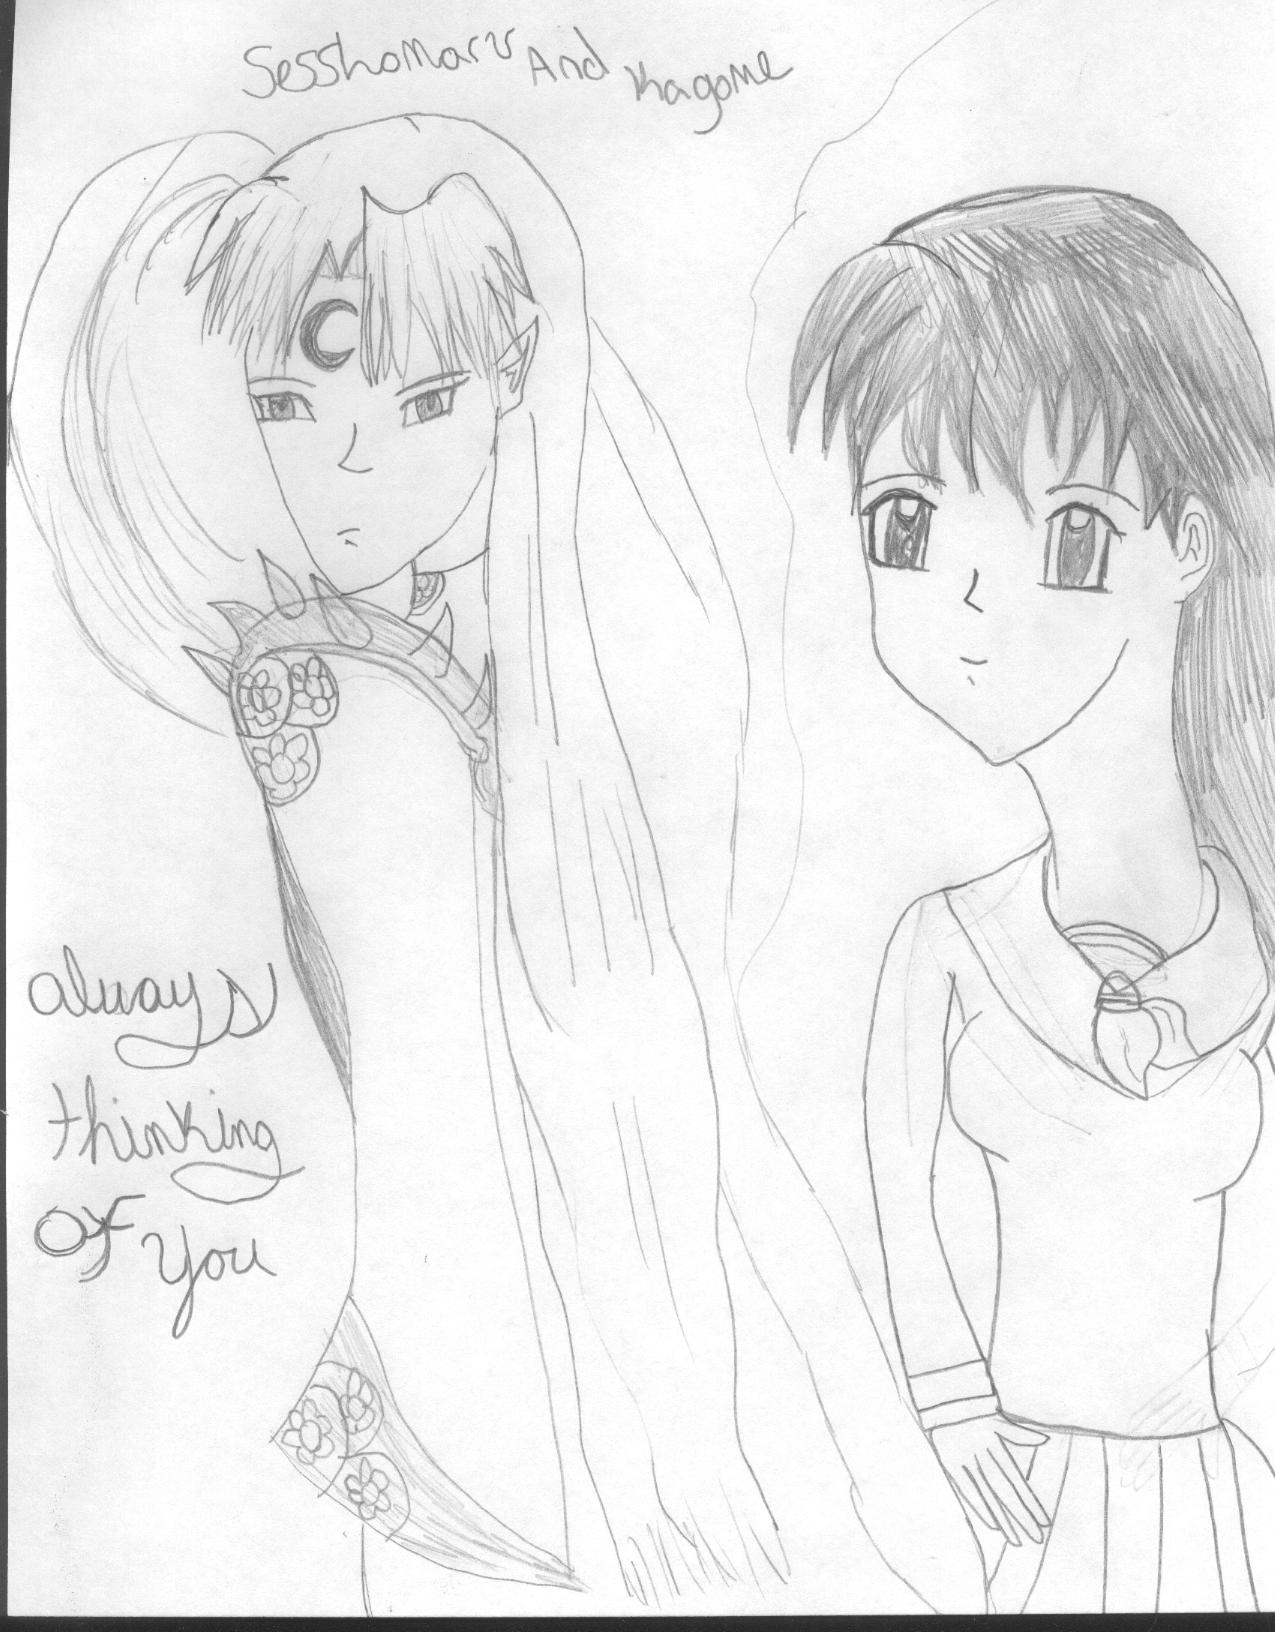 Sesskag (Aways Thinking Of You) by inuyasha_fan2